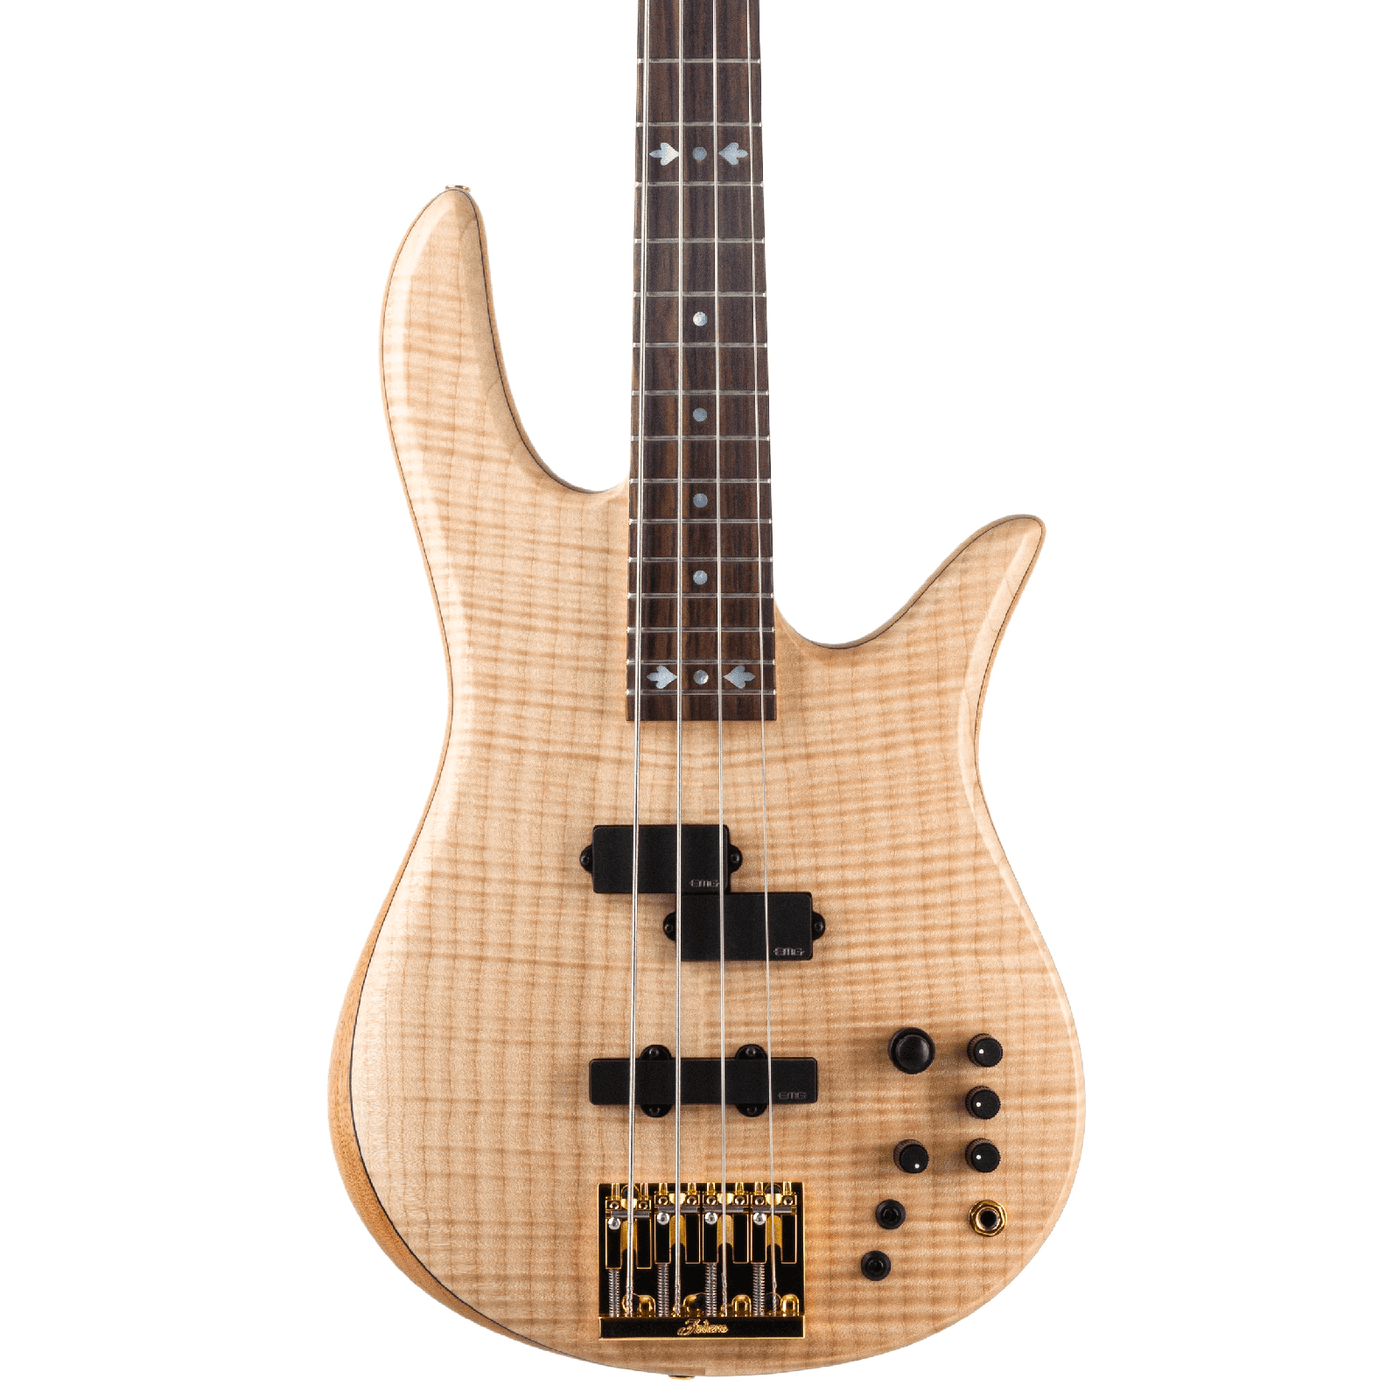 Fodera Victor Wooten '83 Monarch Classic - Victor Wooten purchased his first Monarch bass, serial #037, in 1983. He still uses it regularly in concert and on recordings and considers it to be his #1 instrument. Thanks to Victor’s incredible talent and pop